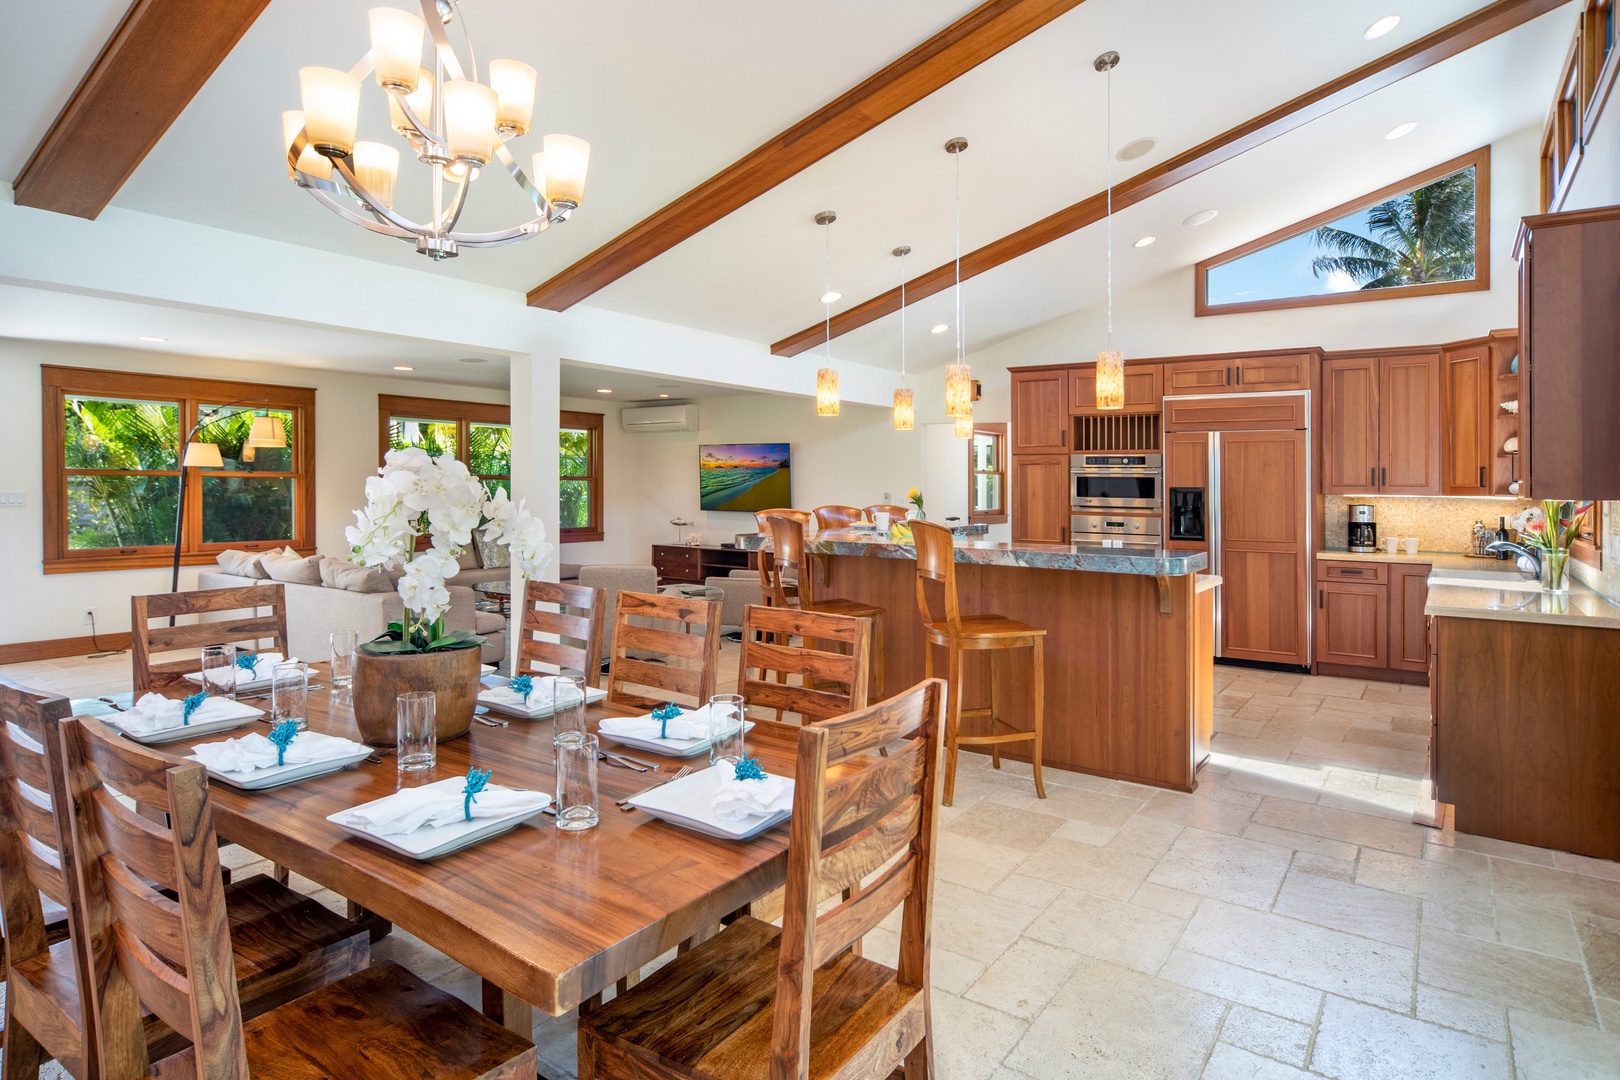 Honolulu Vacation Rentals, Hale Niuiki - Set a table for a delectable meal, or dine al fresco on the patio out back.